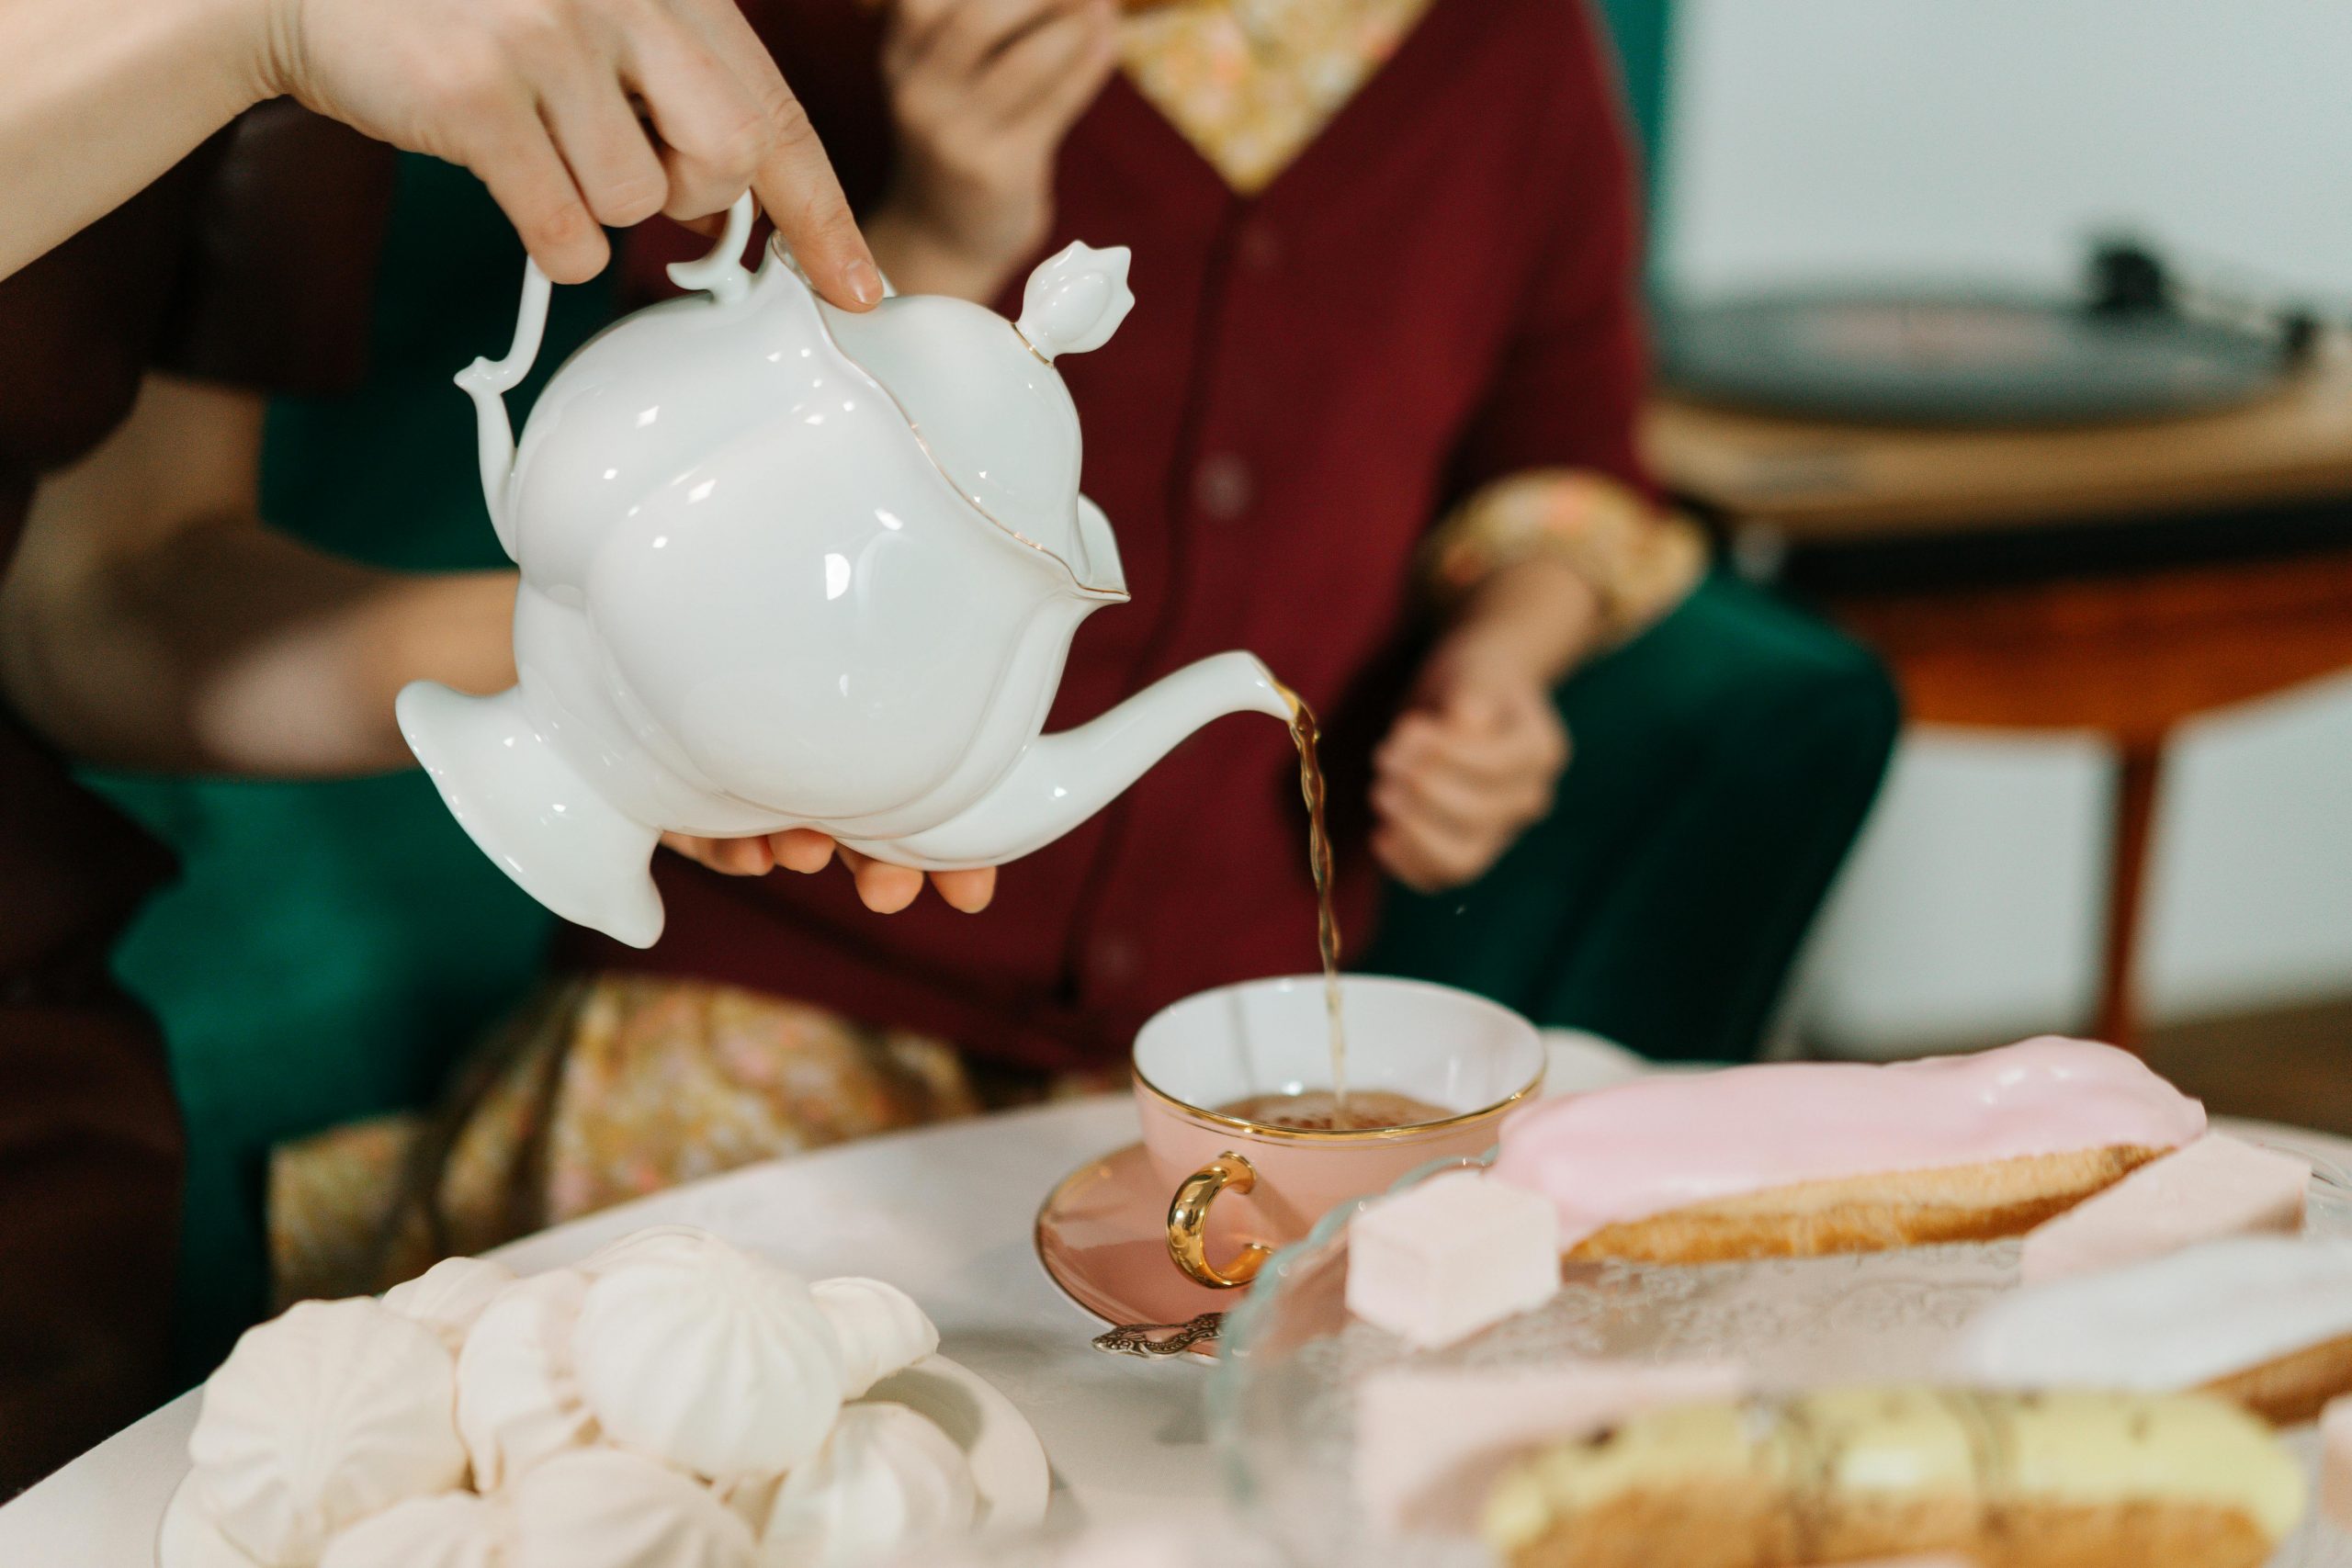 https://www.pexels.com/photo/a-person-pouring-tea-in-the-cup-6974307/